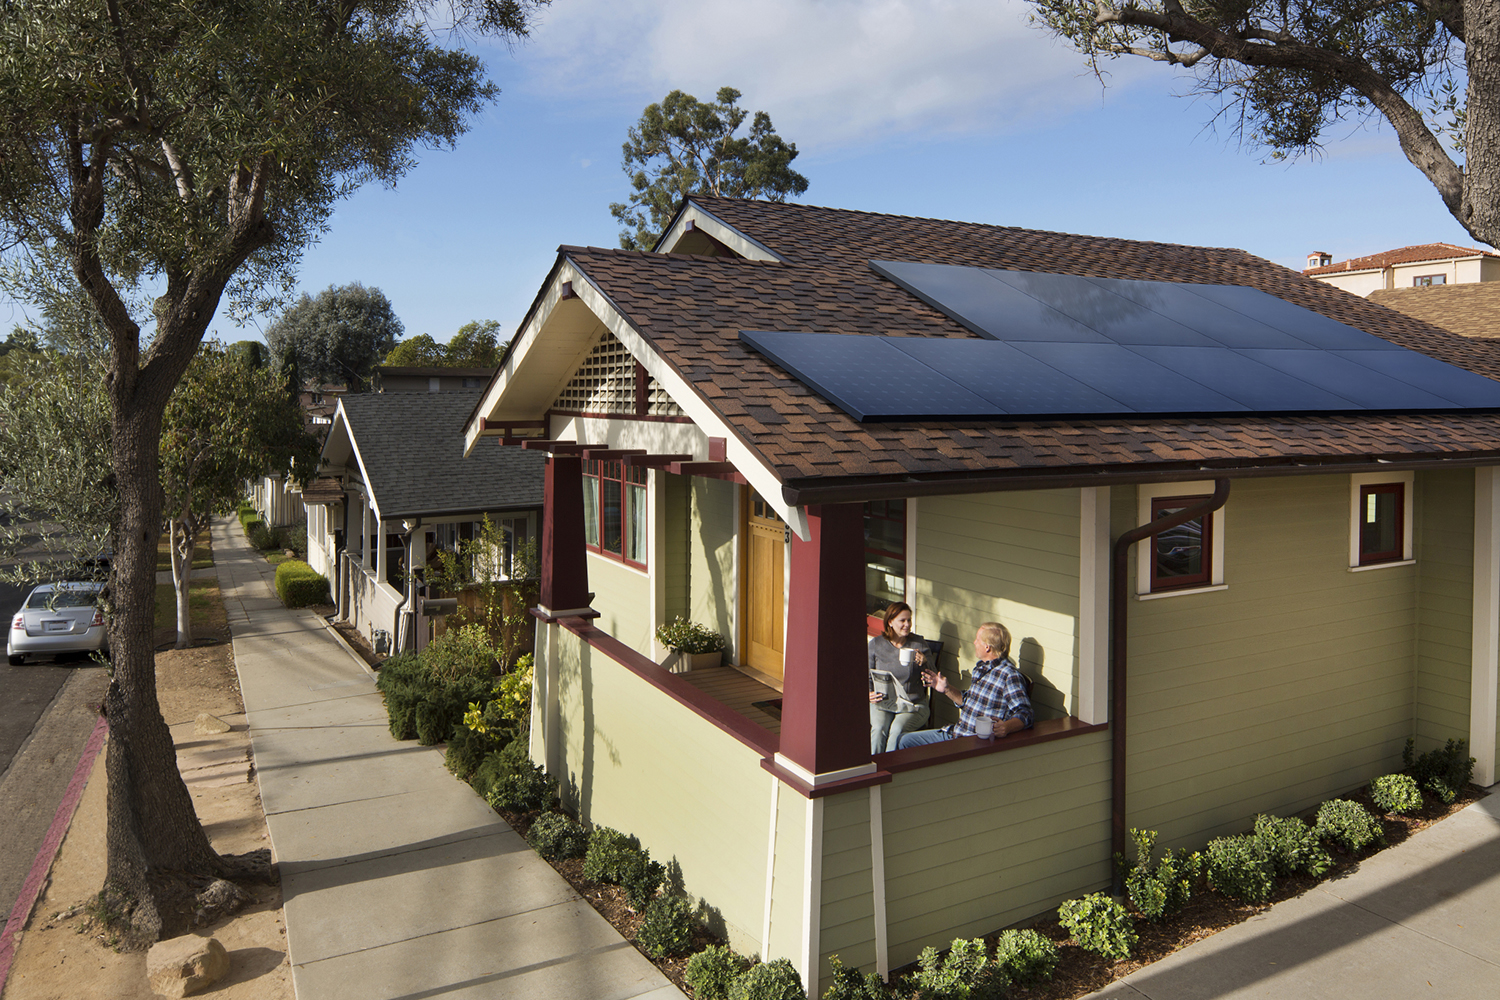 Single Story Home With a Home Solar System Installed